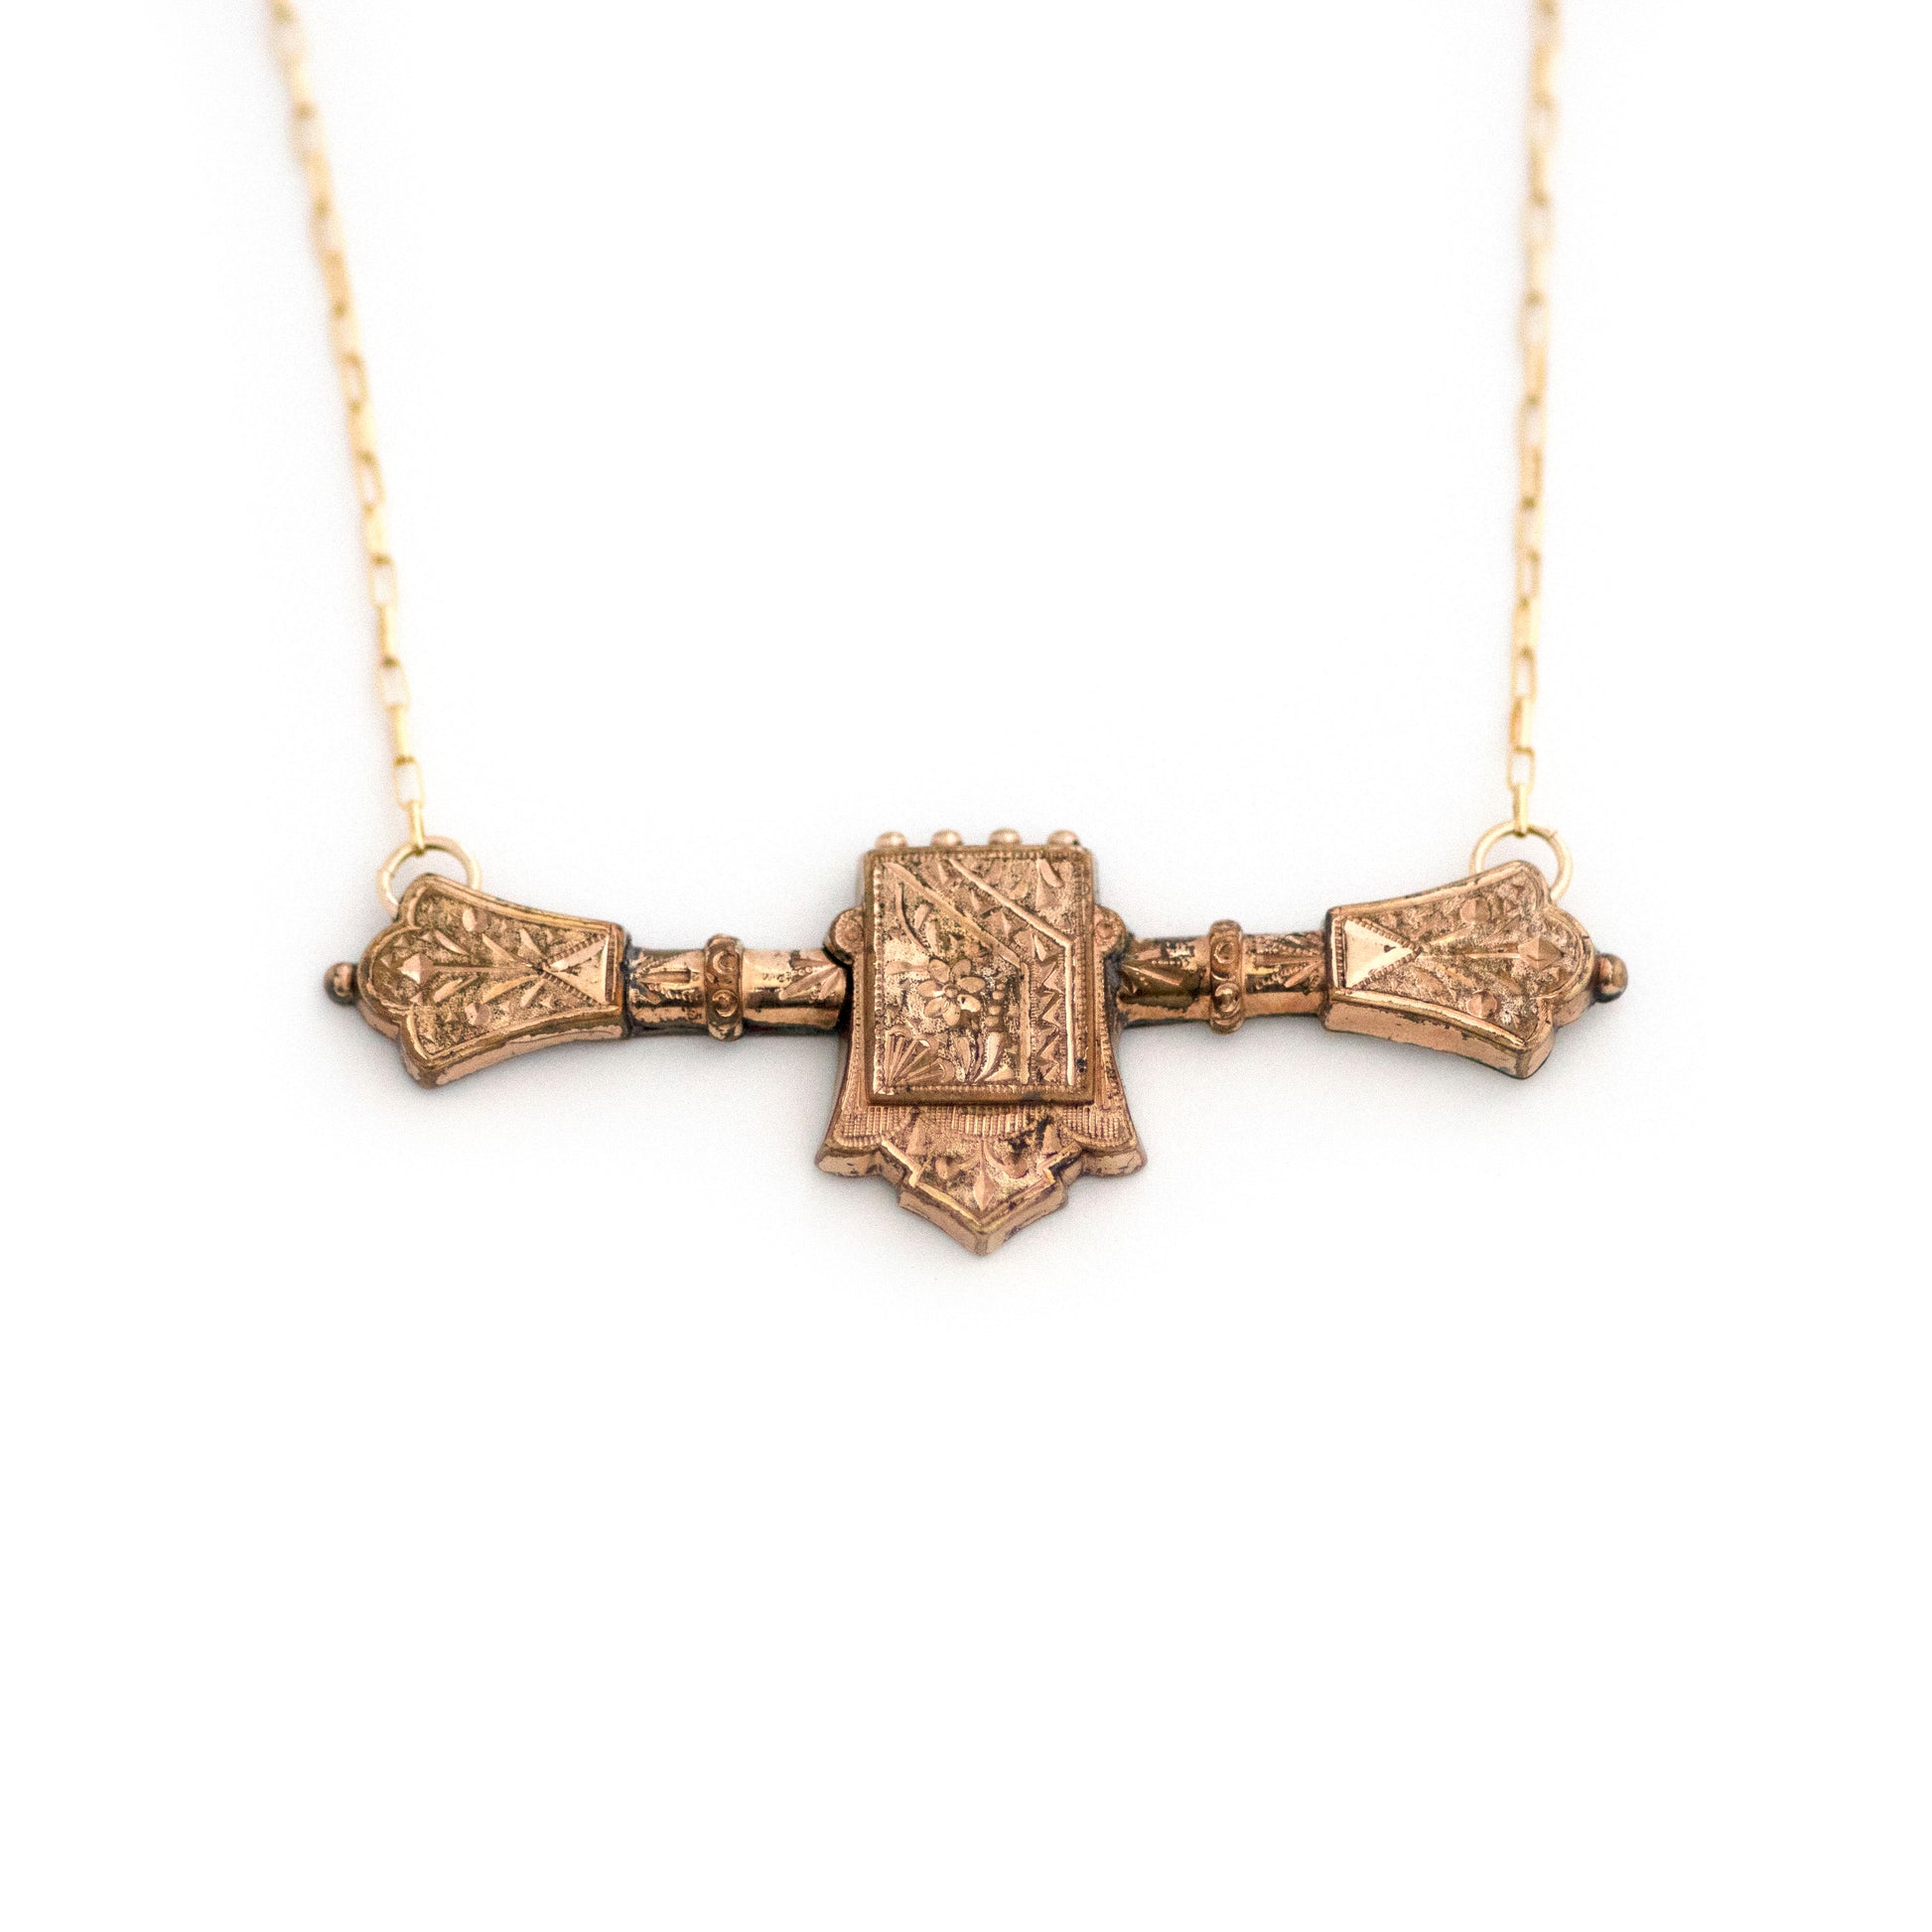 This one-of-a-kind conversion necklace is made up of:  Gold filled Victorian bar pin pendant from the late 1800s with hand tooled details including floral accents.